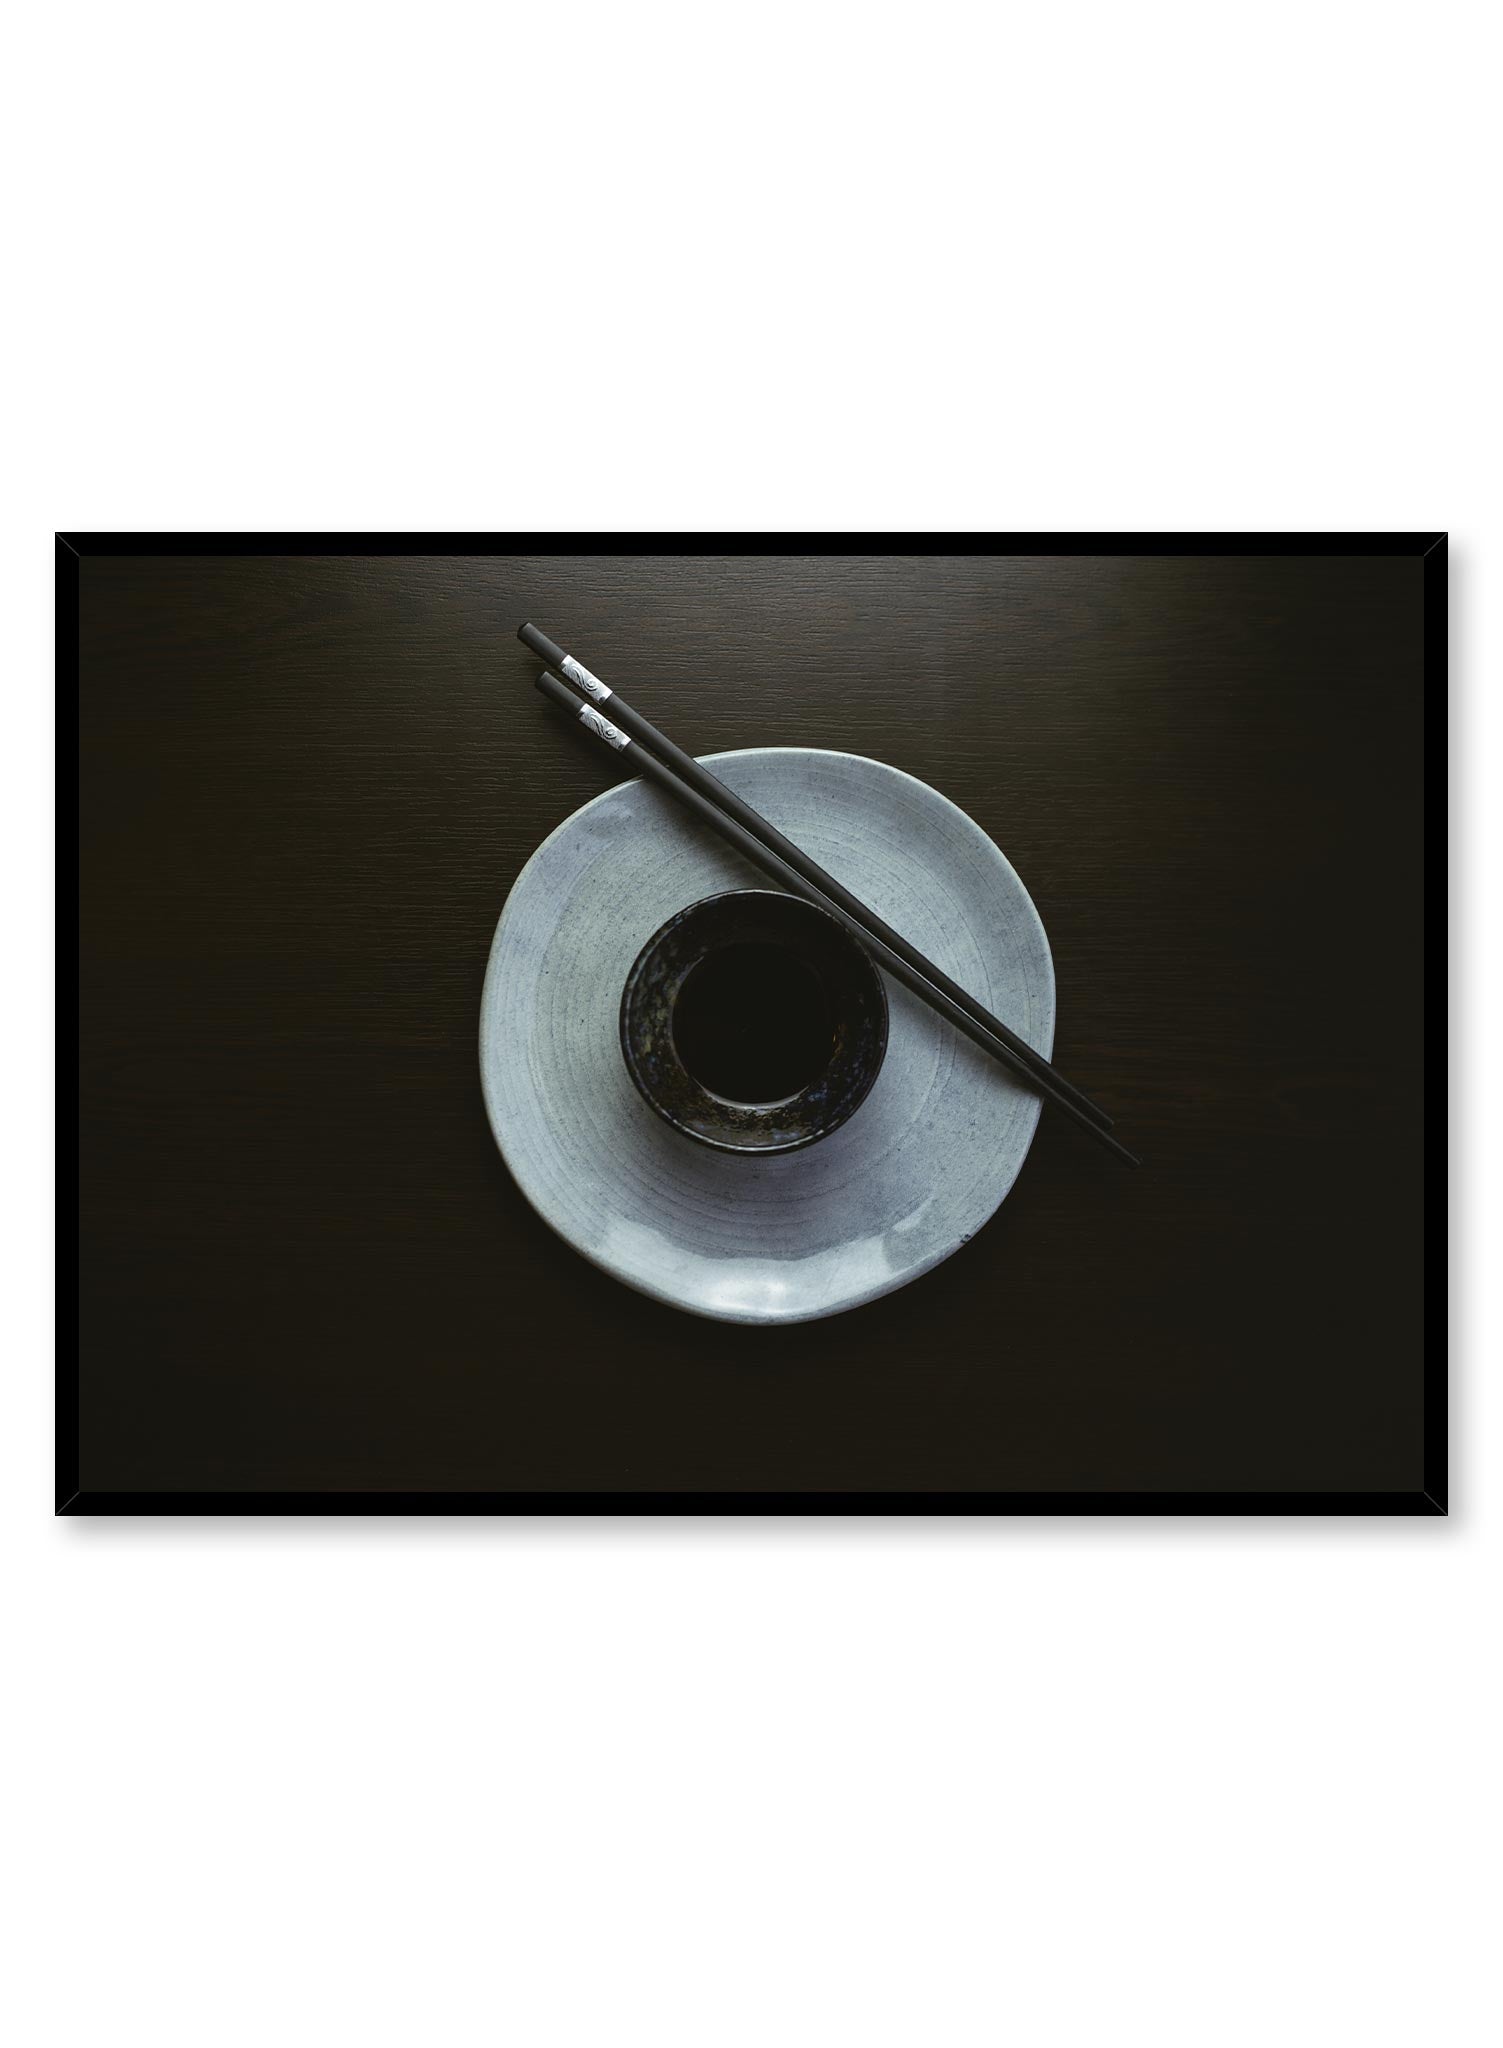 Inku is a minimalist photography by Opposite Wall of a pair of chopsticks on a plate with a saucer in the center.